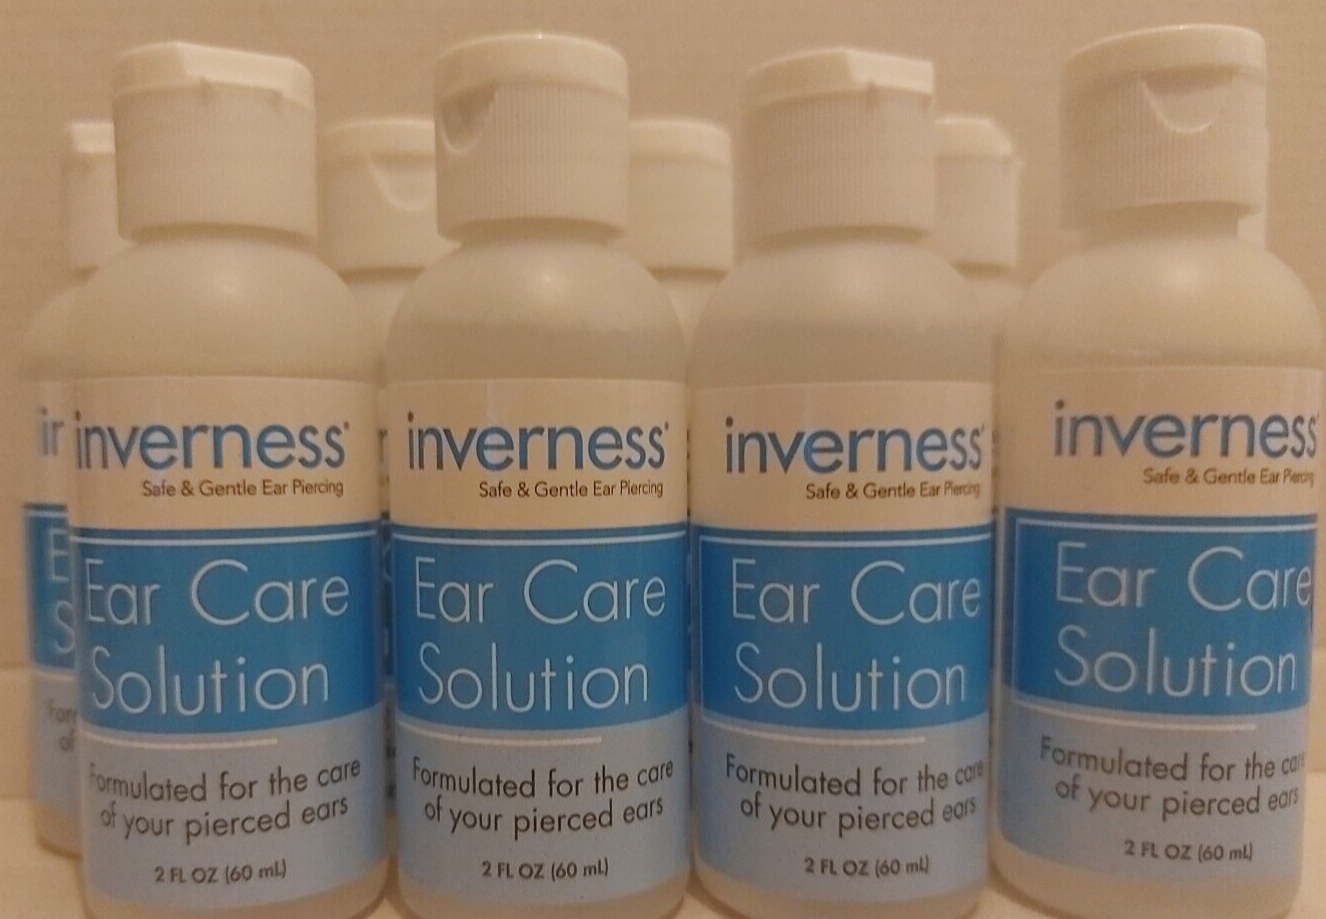 9 x Inverness 60ml 2 oz Ear Piercing Solution After Care Lotion Bottles